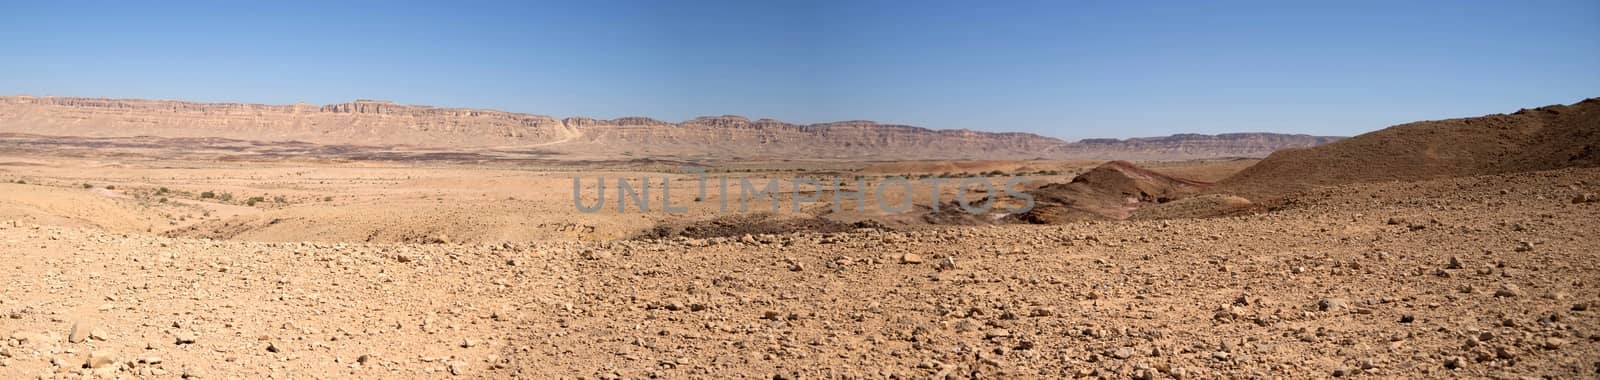 Wide angle panorama of Desert landscape by javax